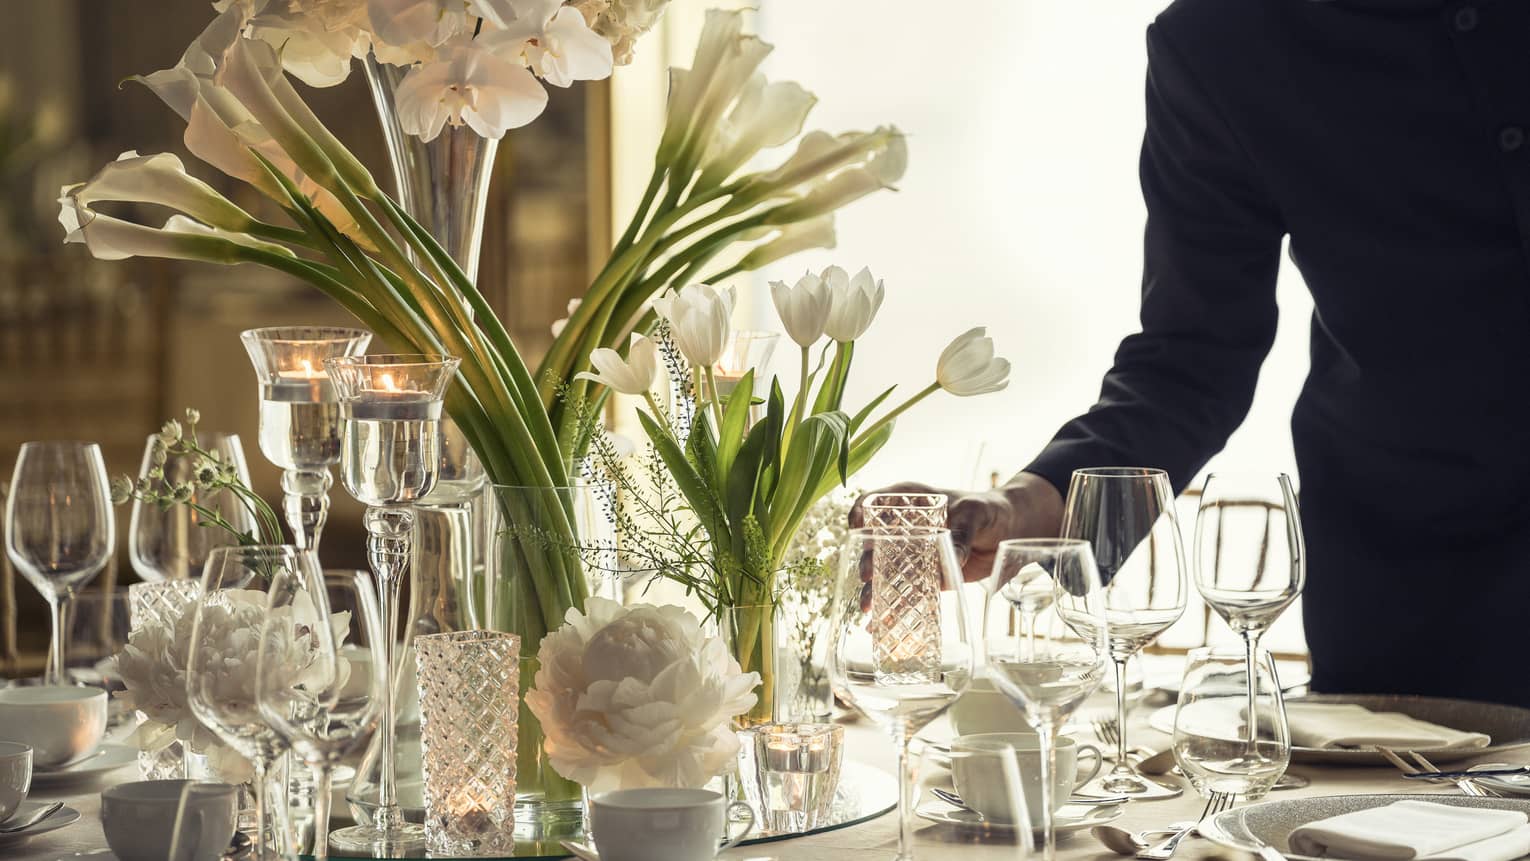 Hotel staff sets elegant banquet dining table with crystal glasses, vases with white flowers